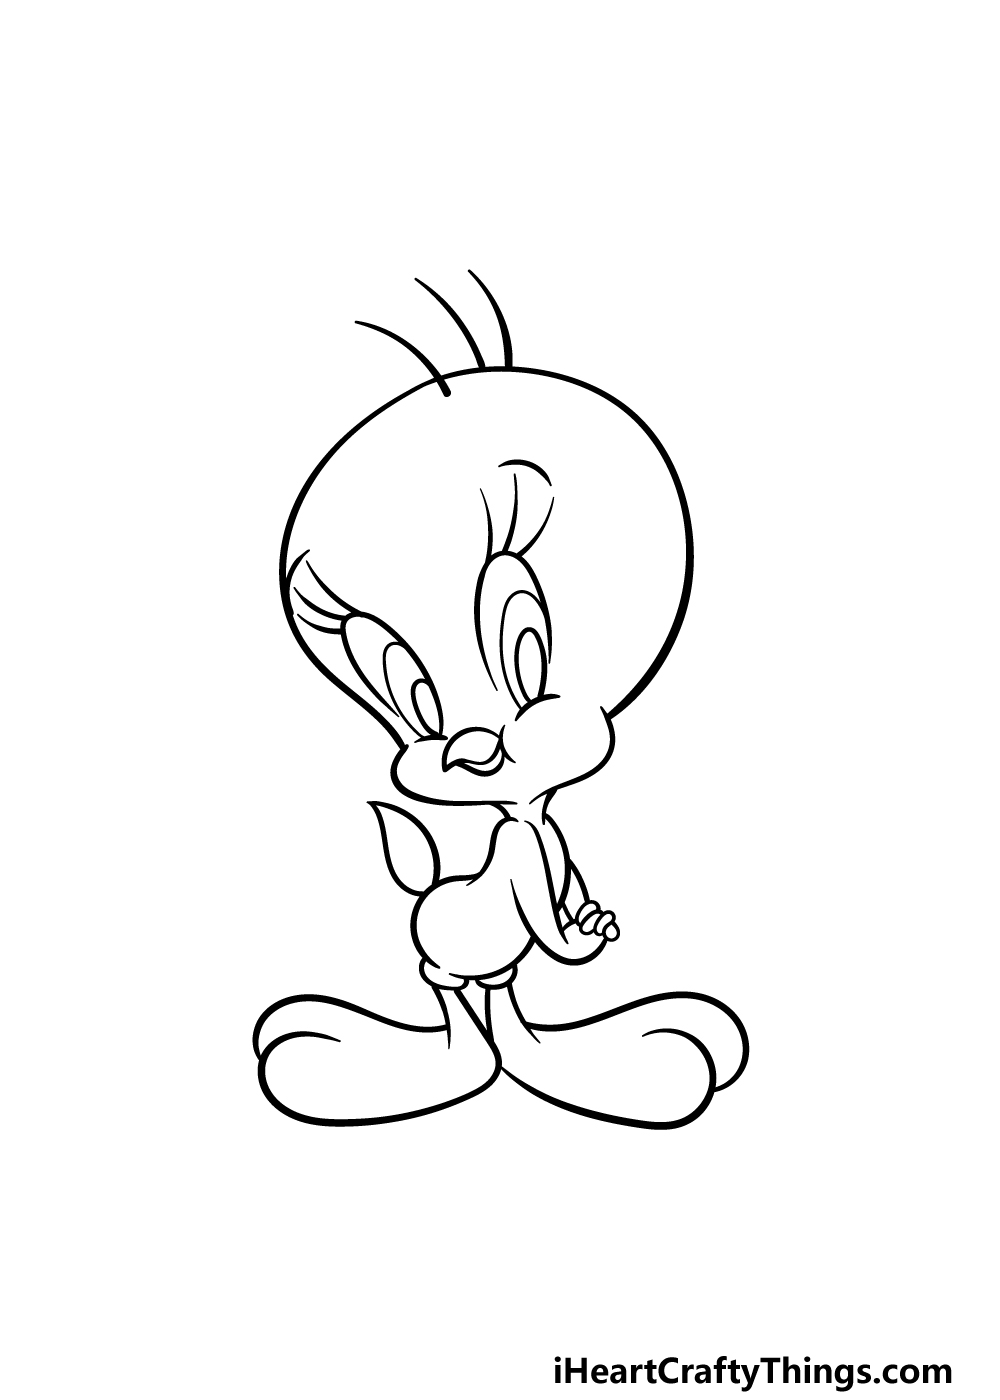 Tweety Bird Thinking Coloring Page for Kids - Free Tweety Printable  Coloring Pages Online for Kids - ColoringPages101.com | Coloring Pages for  Kids